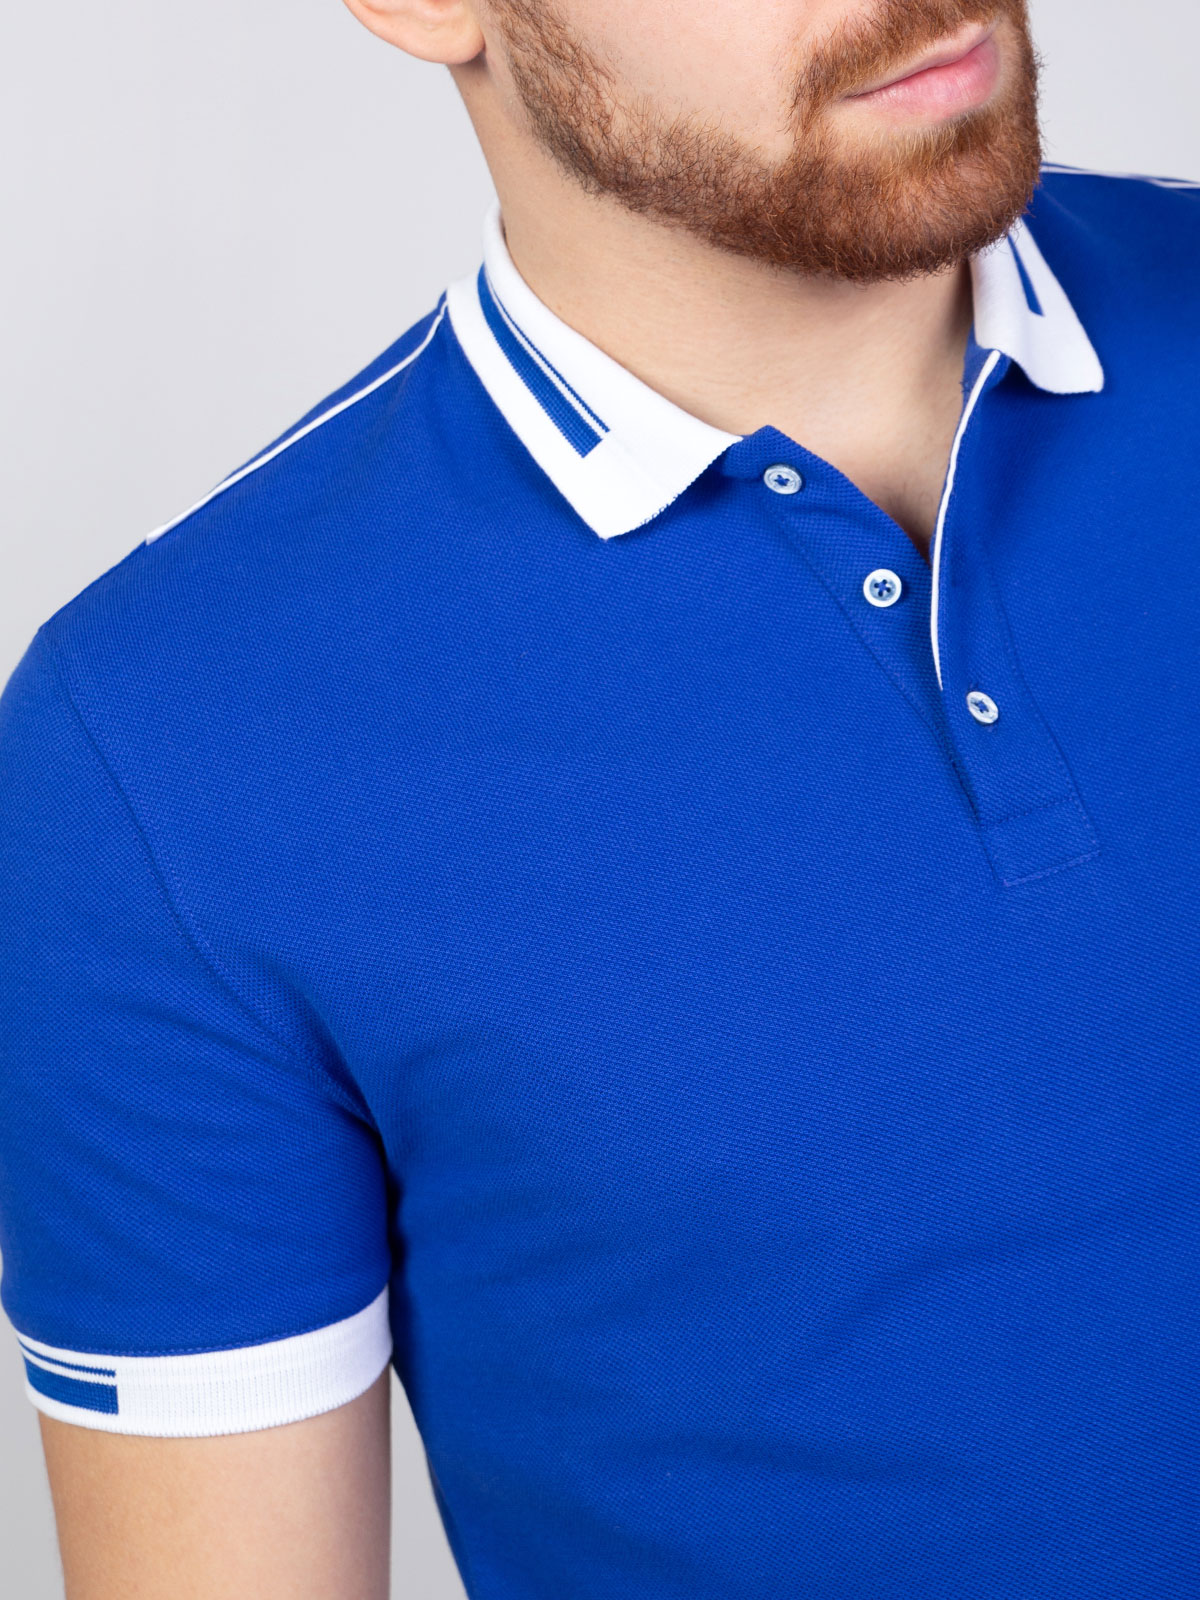 Blouse in royal blue with collar in whi - 93398 € 20.25 img3